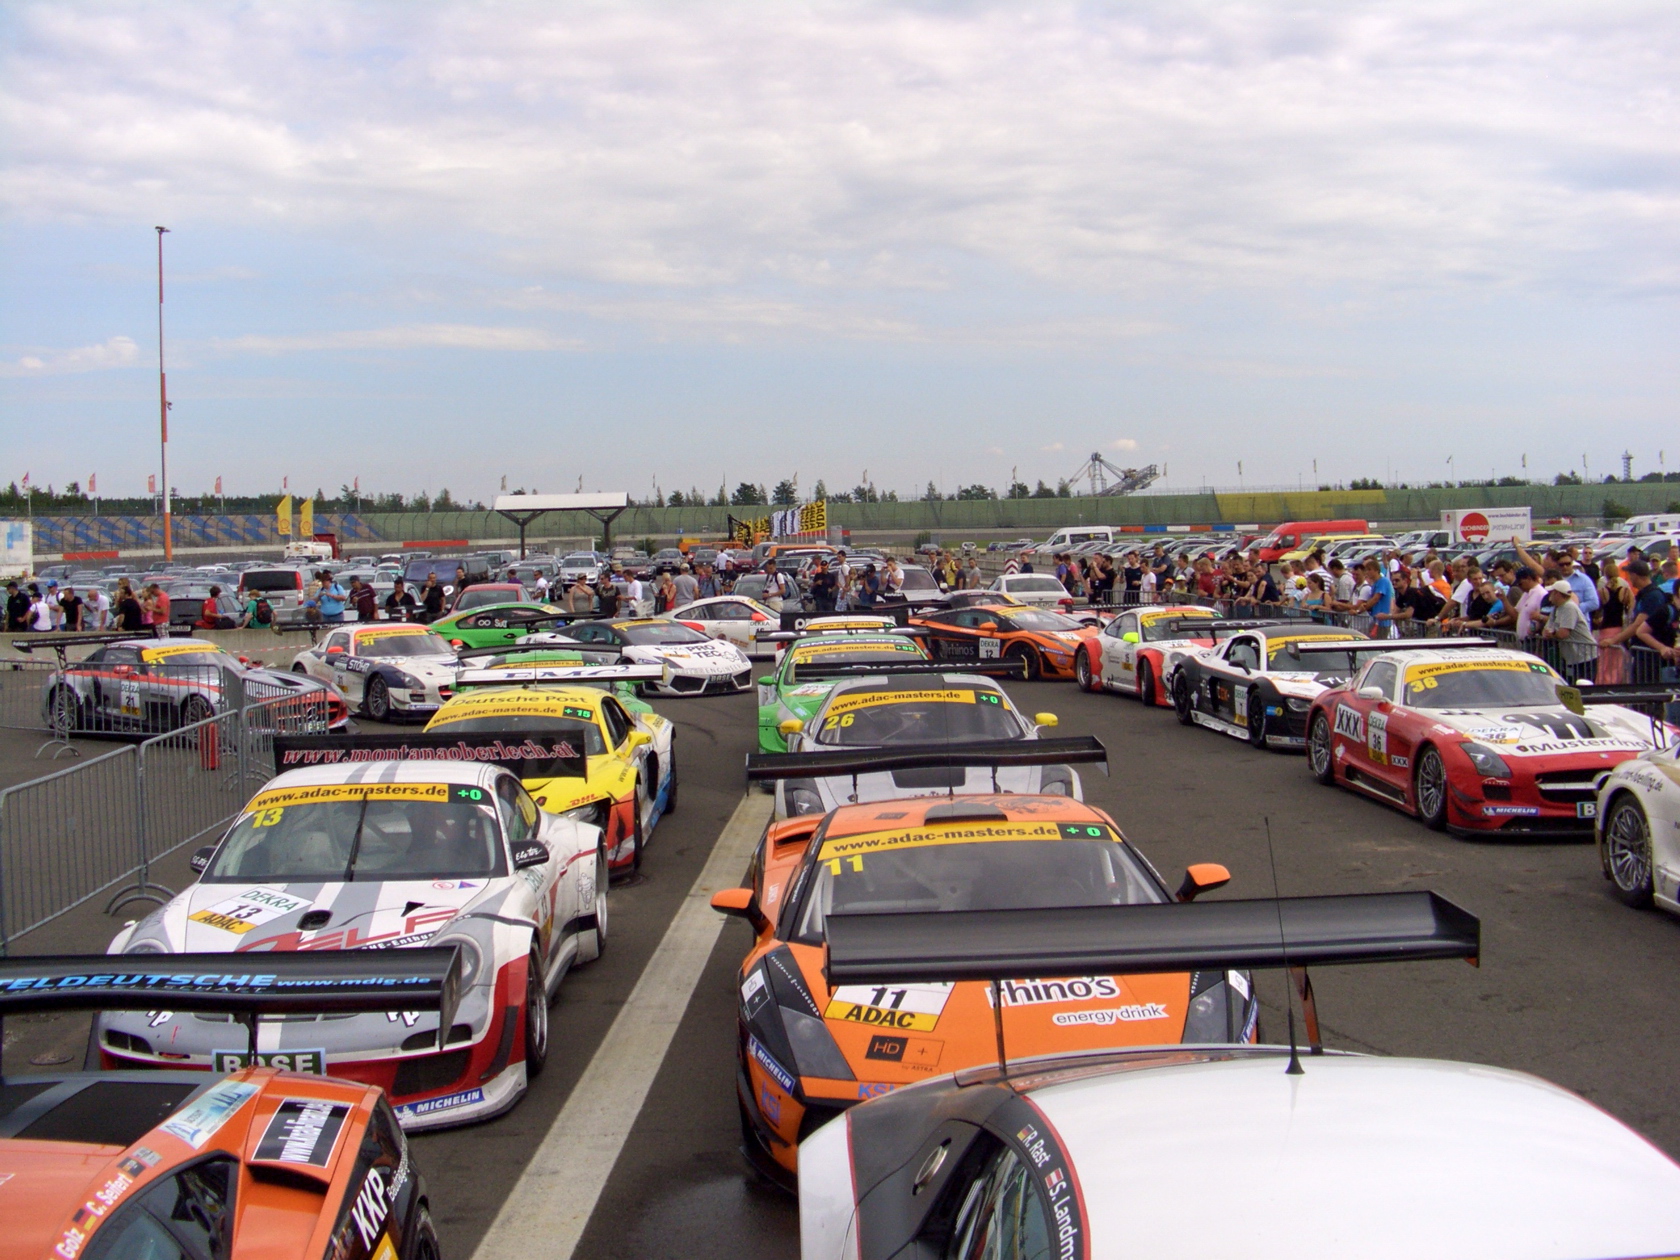 there are many cars that are all on this race field